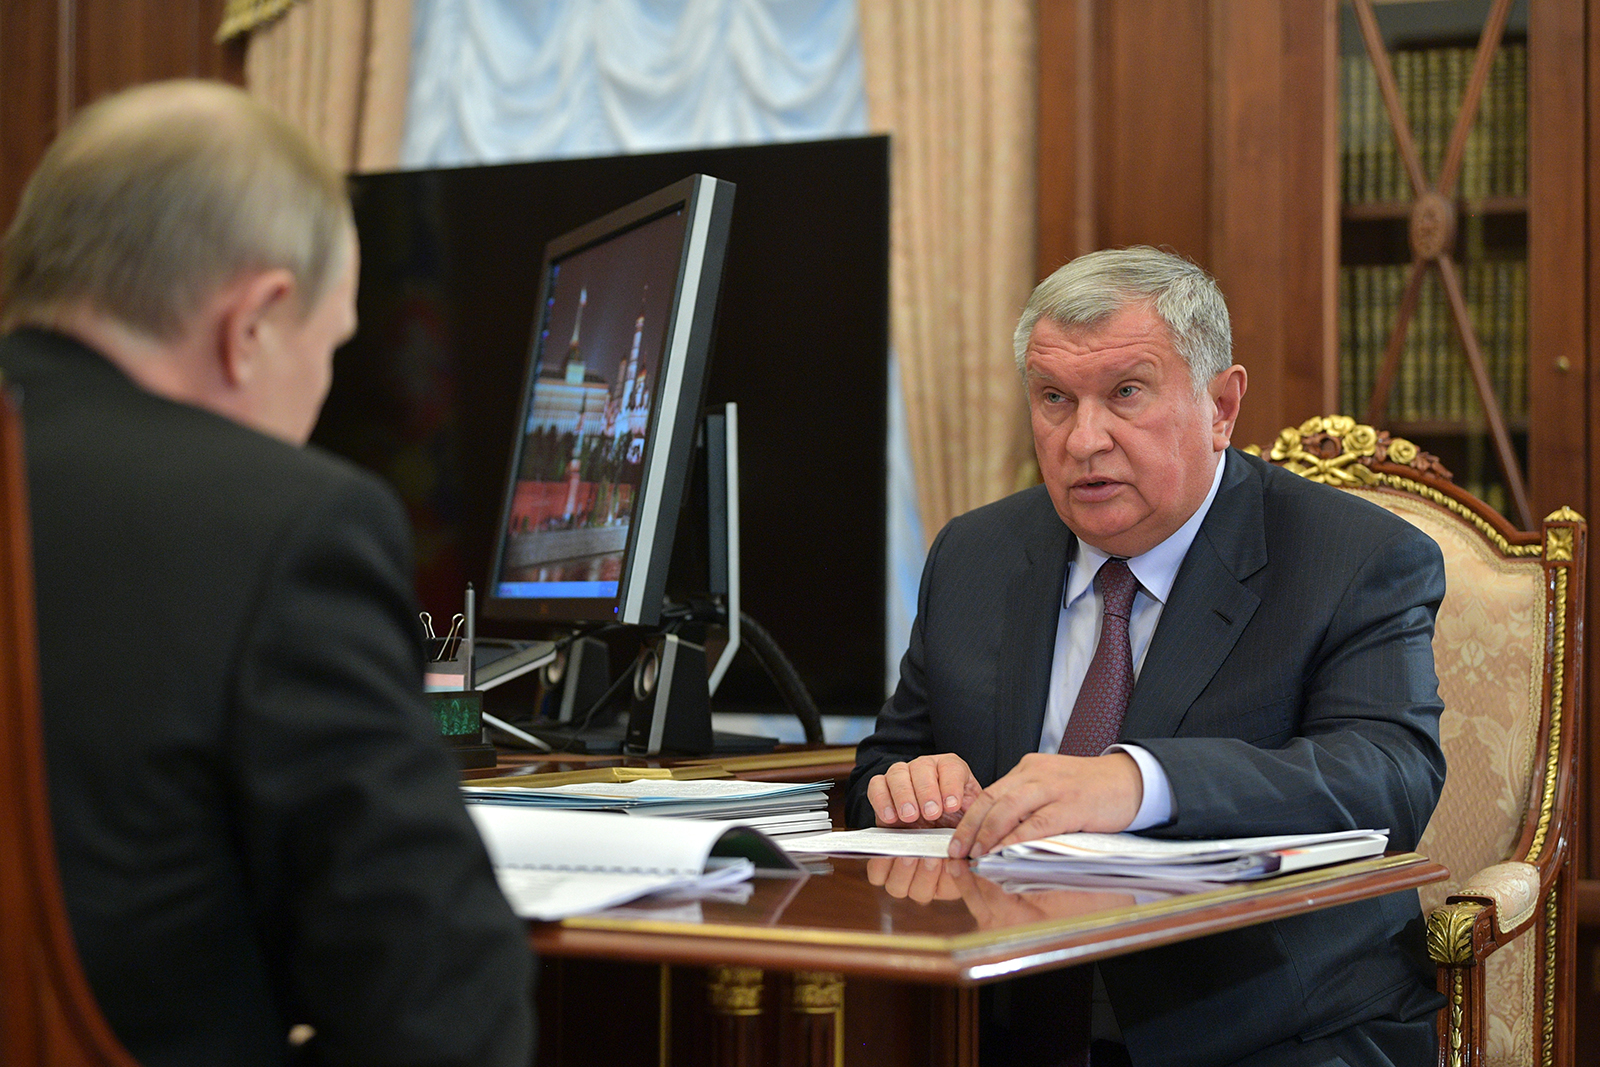 Russia's President Vladimir Putin (L) and Rosneft CEO Igor Sechin talk during a meeting at the Kremlin in Moscow, Russia, on February 11, 2020.